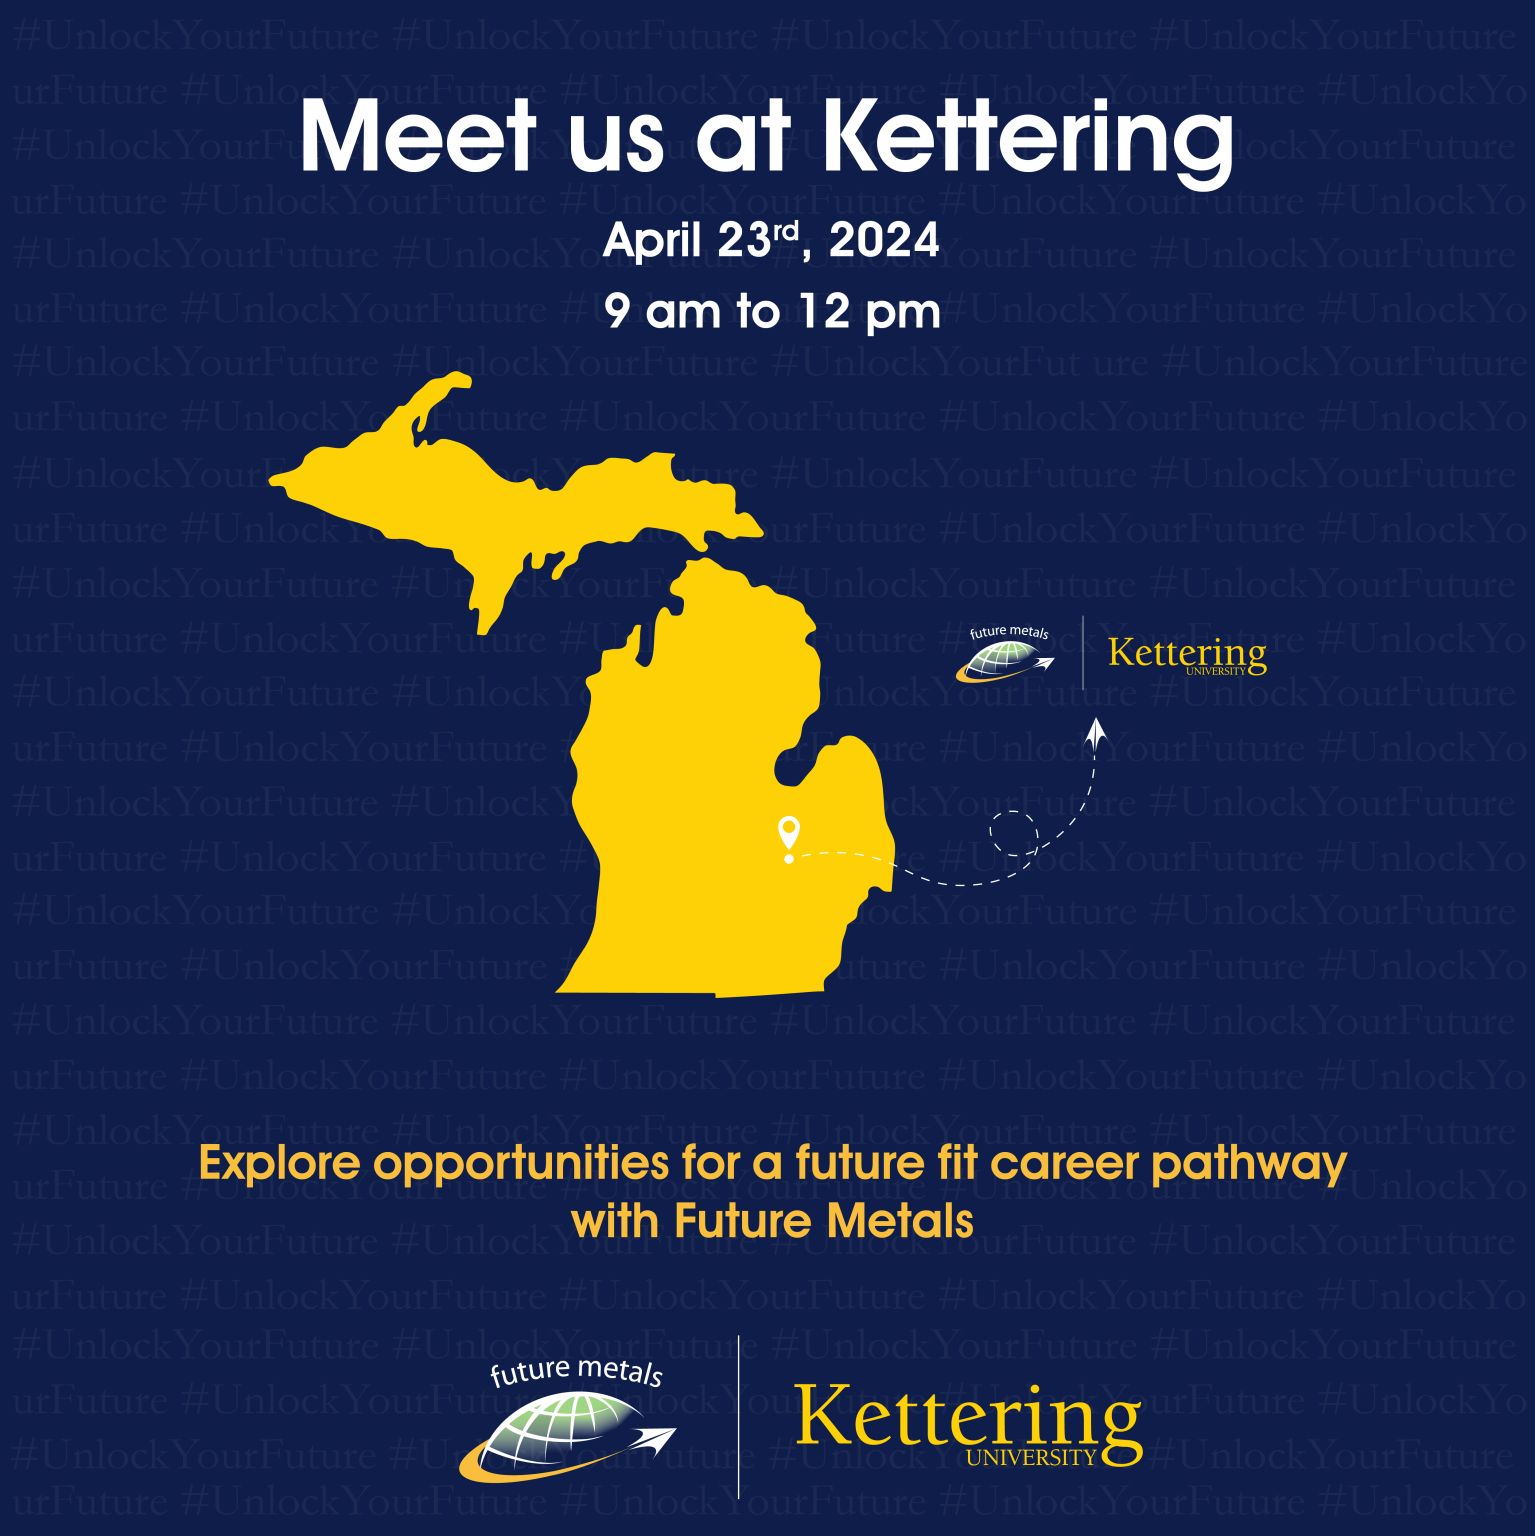 Extrusions, aircraft, aerospace, metal supplier, metals 1. "Explore aerospace career opportunities at Future Metals, Kettering University event on April 23rd, 2024."

2. "Michigan's aerospace hub emphasized by high-grade alloy map at Future Metals' Kettering University fair."

3. "Revel in aircraft-grade metal extrusions highlighted at Future Metals career event."

4. "Compliance-focused aviation career opportunities await with Future Metals, April 23, 2024 at Kettering University." 

5. "Discover your future in the metals supply chain with Future Metals and Kettering University.